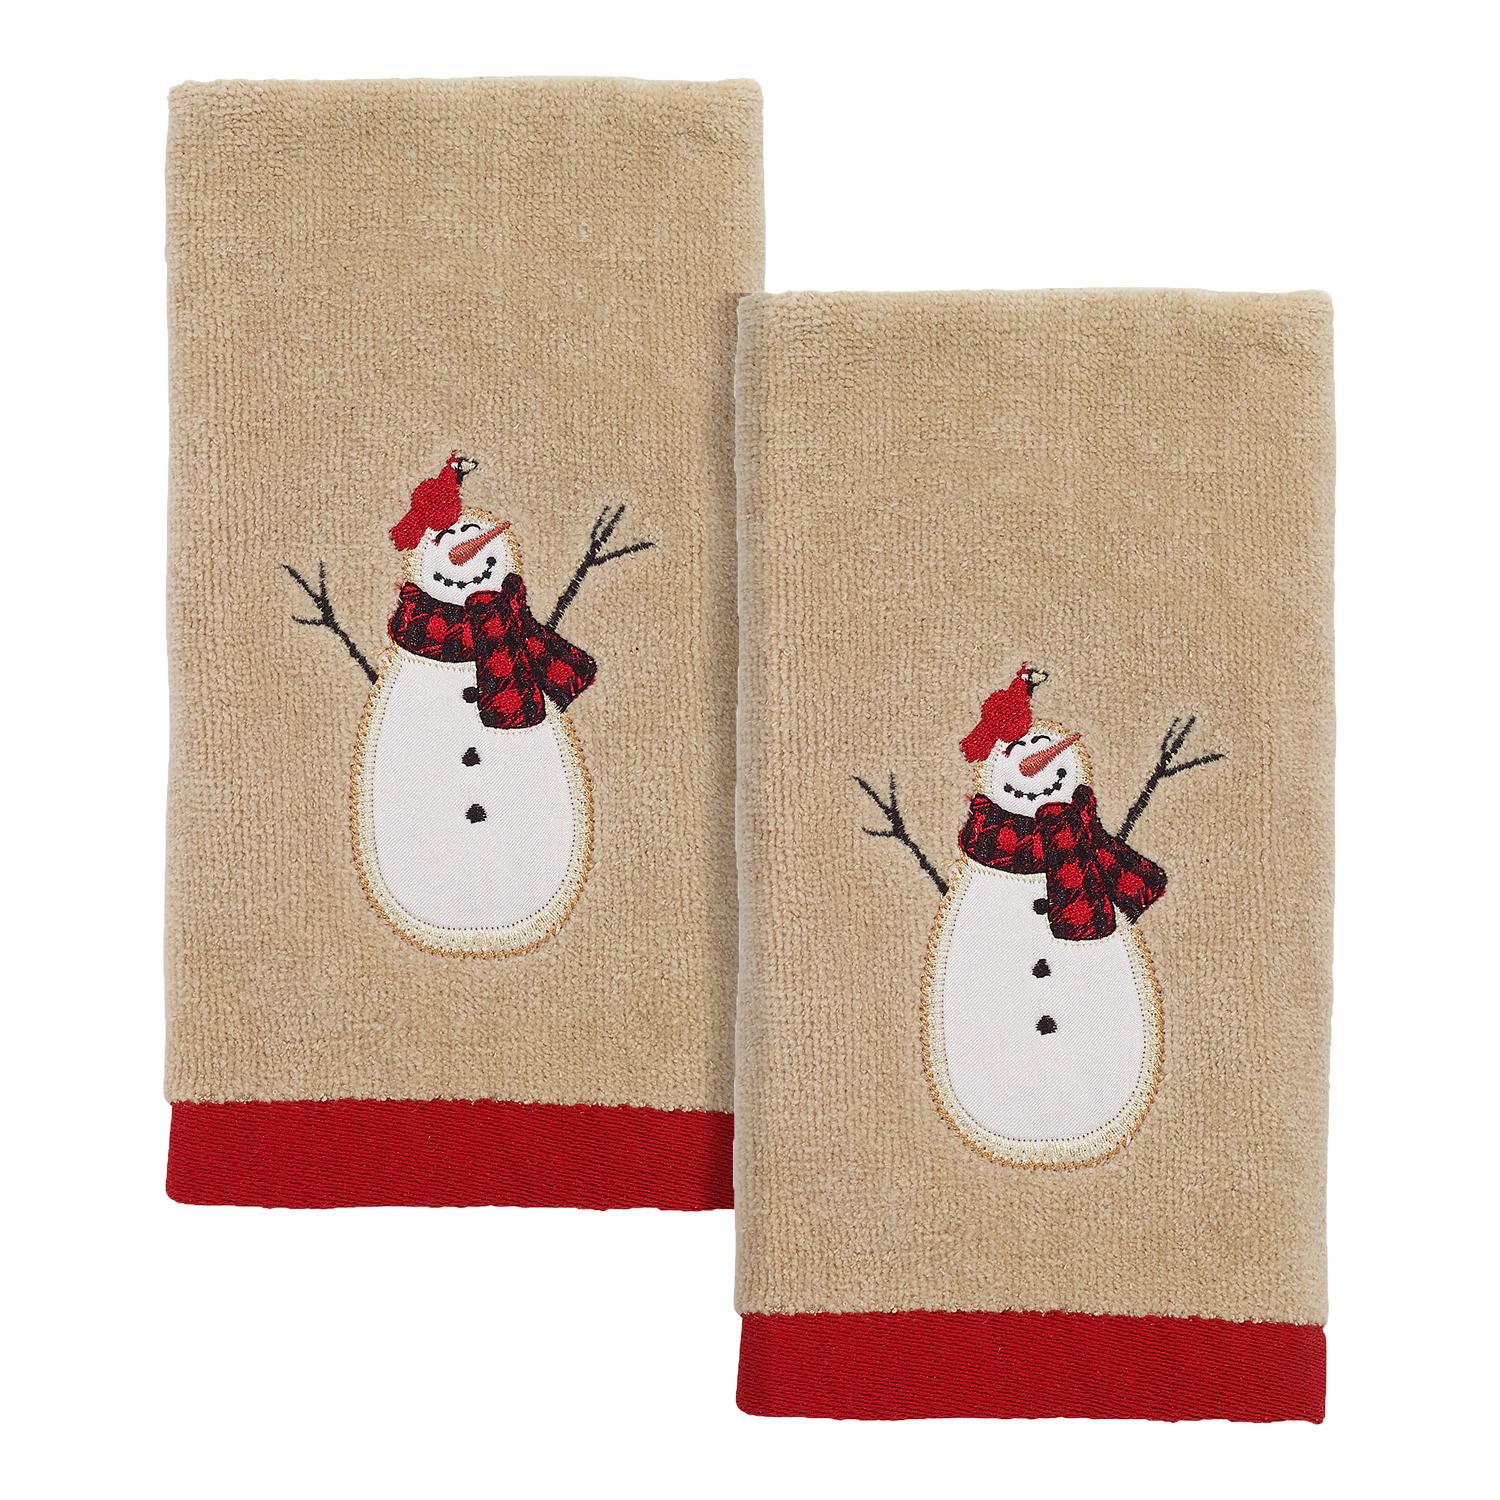 EMBROIDERED SNOWMAN CHRISTMAS Towelsnowman With Cardinalwinter Towelkitchen  Towelflour Sackcottonterry Clothhand Towelchristmas Gift 